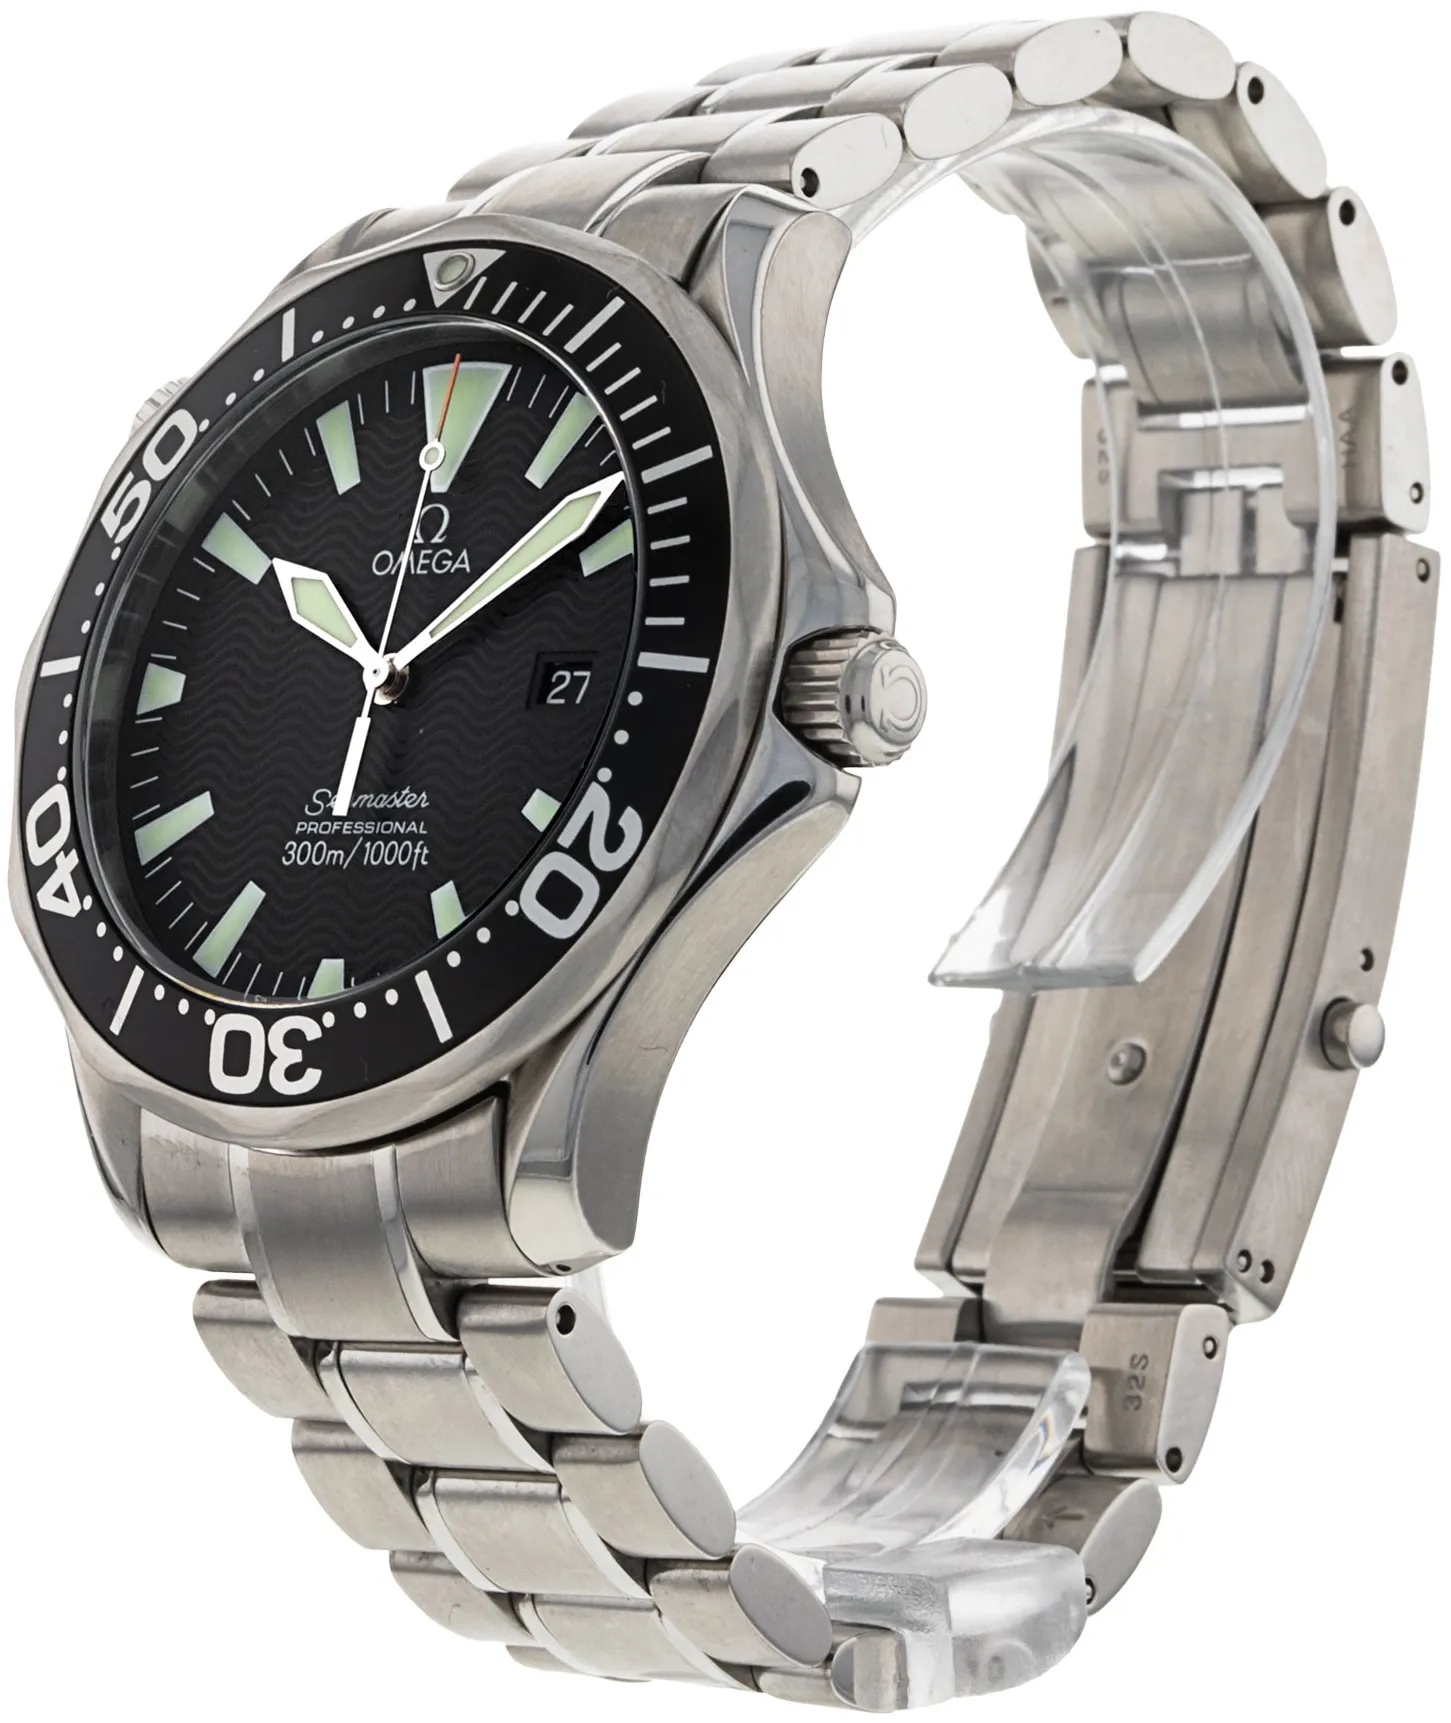 Omega Seamaster Diver 300M 2264.50.00 41mm Stainless steel 2